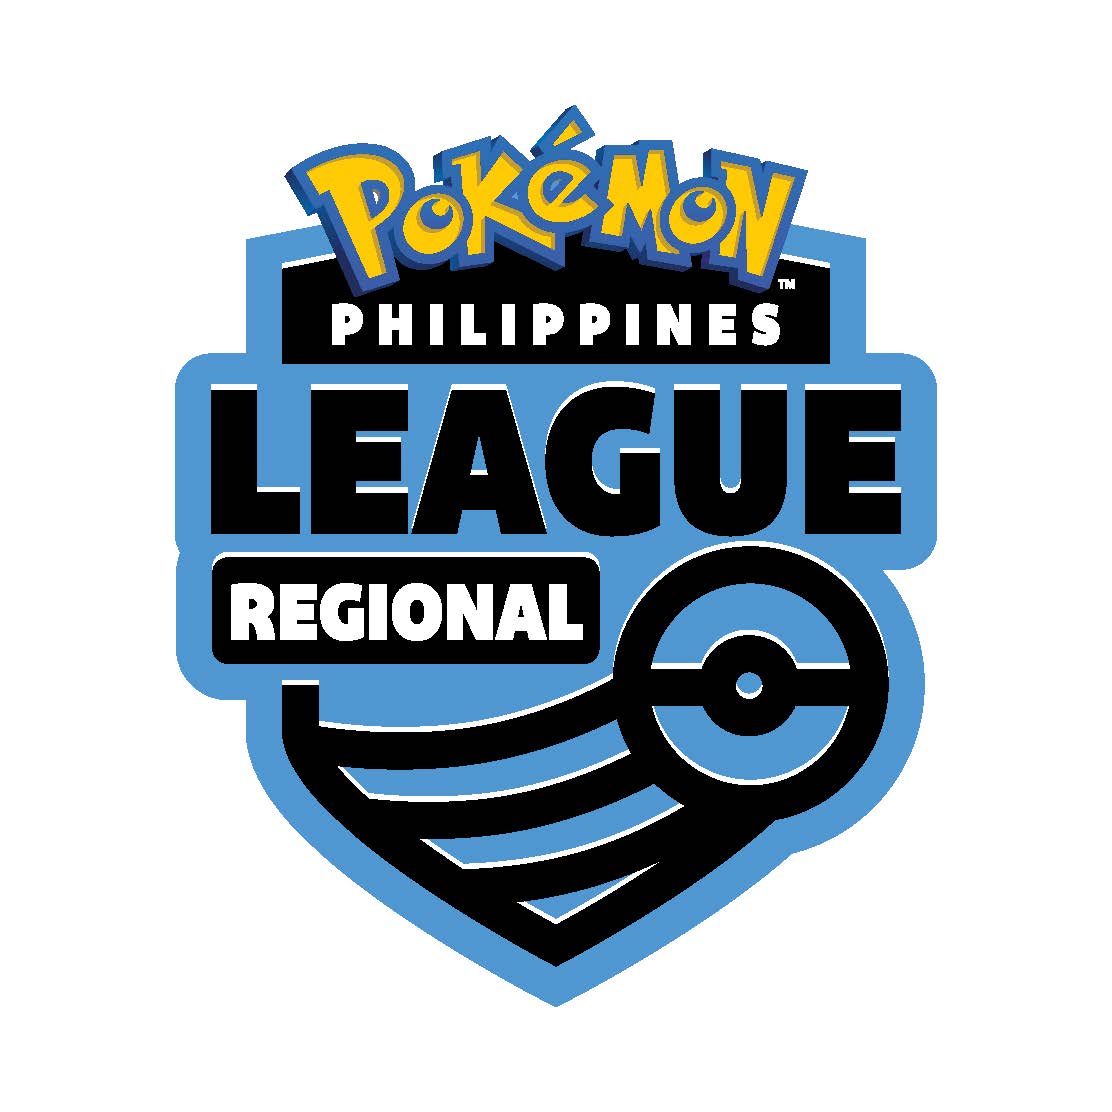 The official Pokémon Website in Philippines